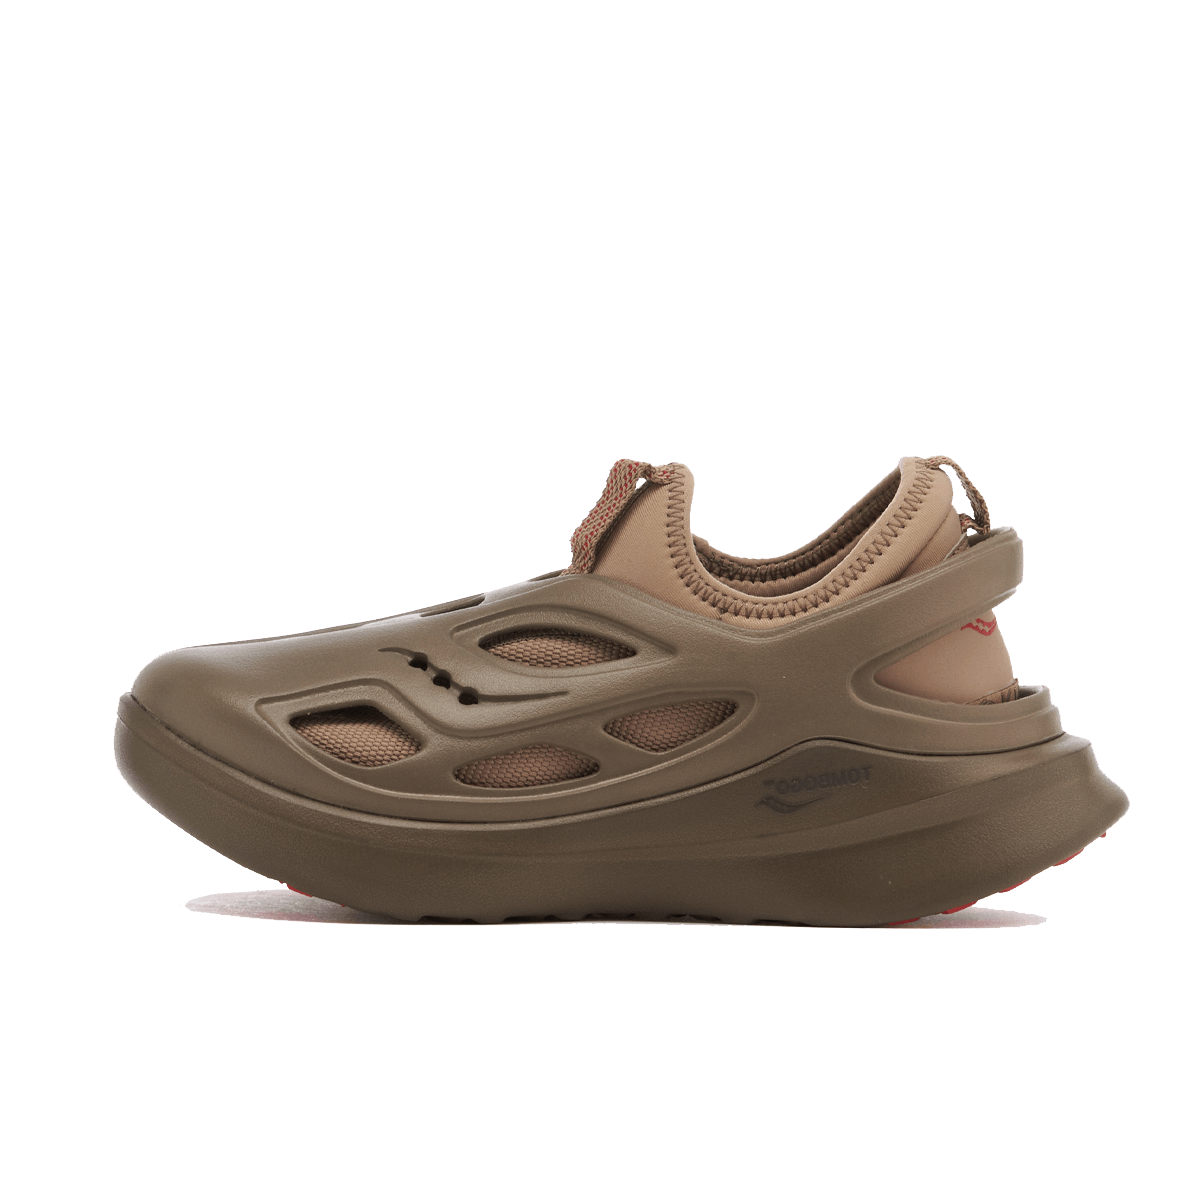 TOMBOGO x Saucony Butterfly 'Boulder Brown'